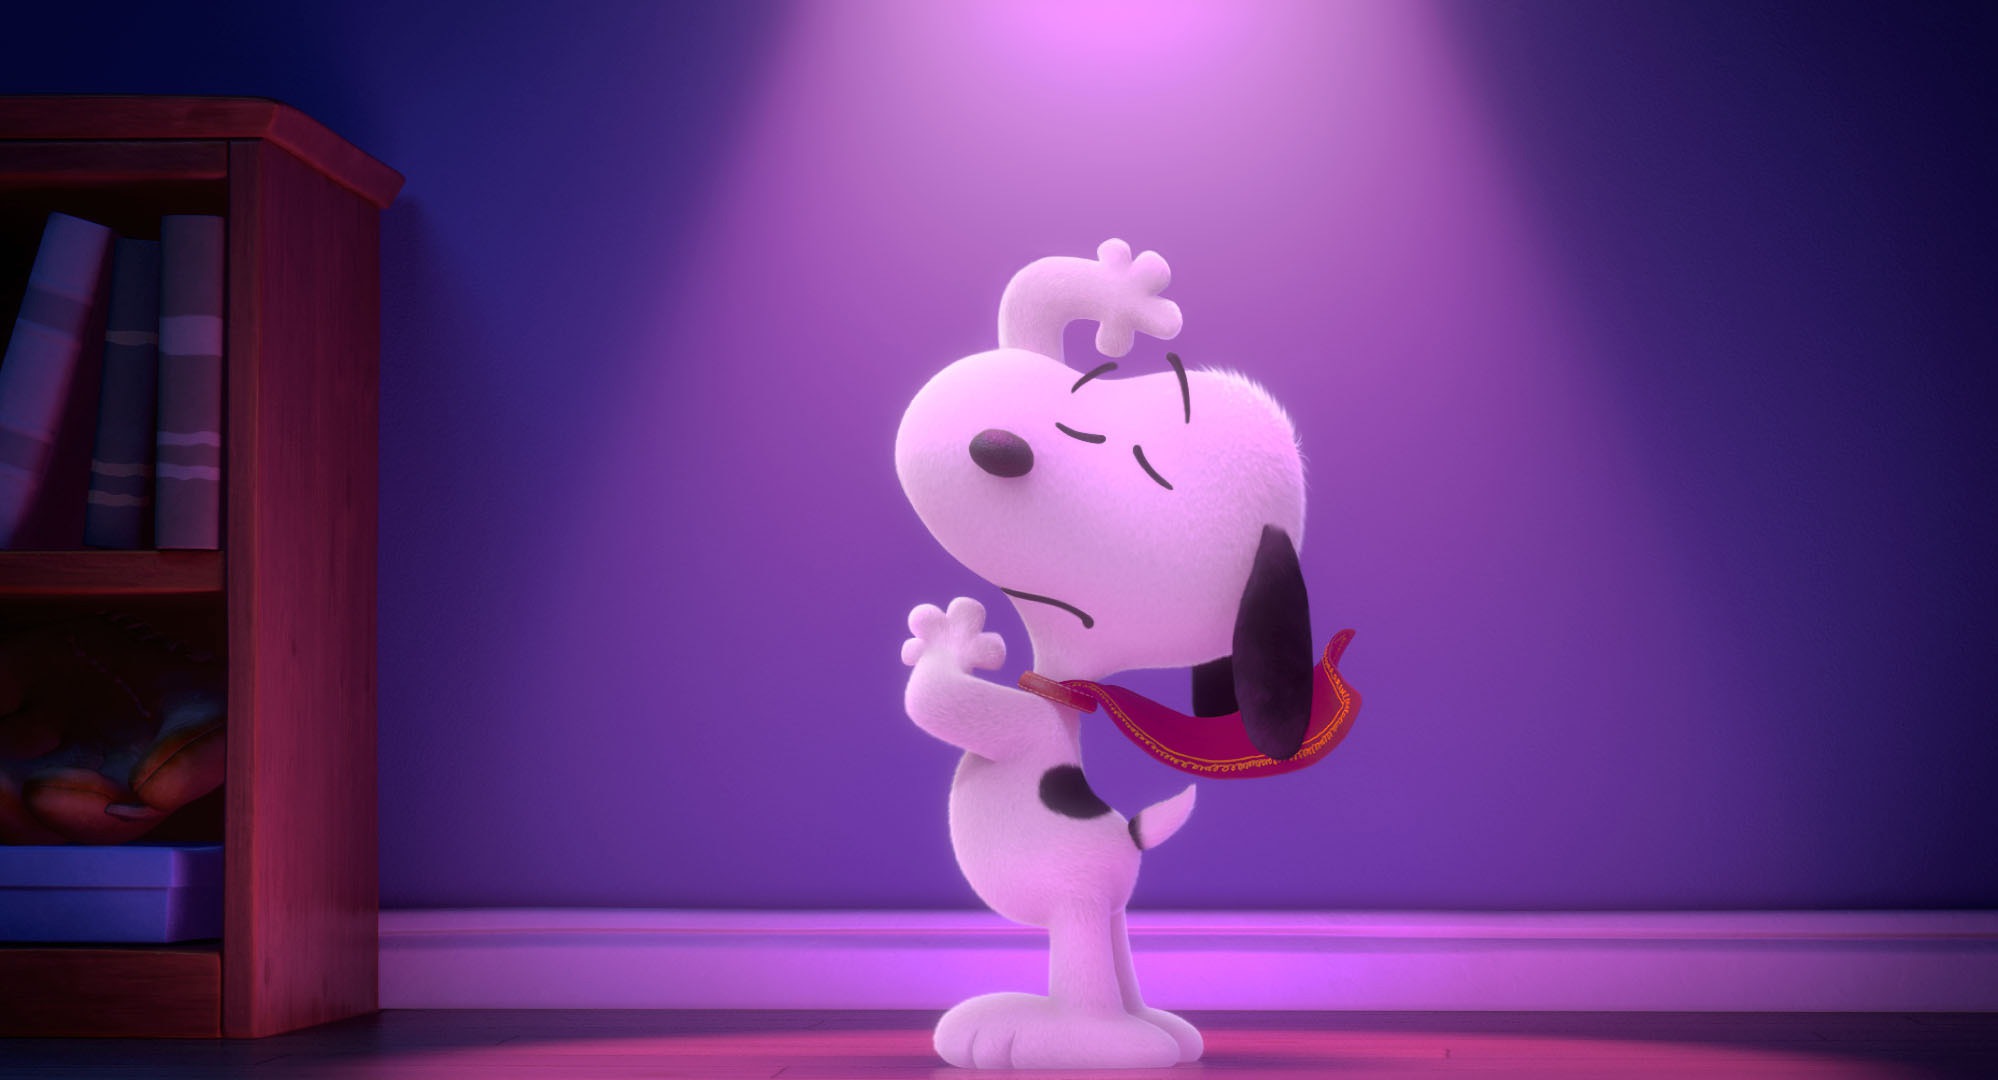 10+ The Peanuts Movie HD Wallpapers and Backgrounds